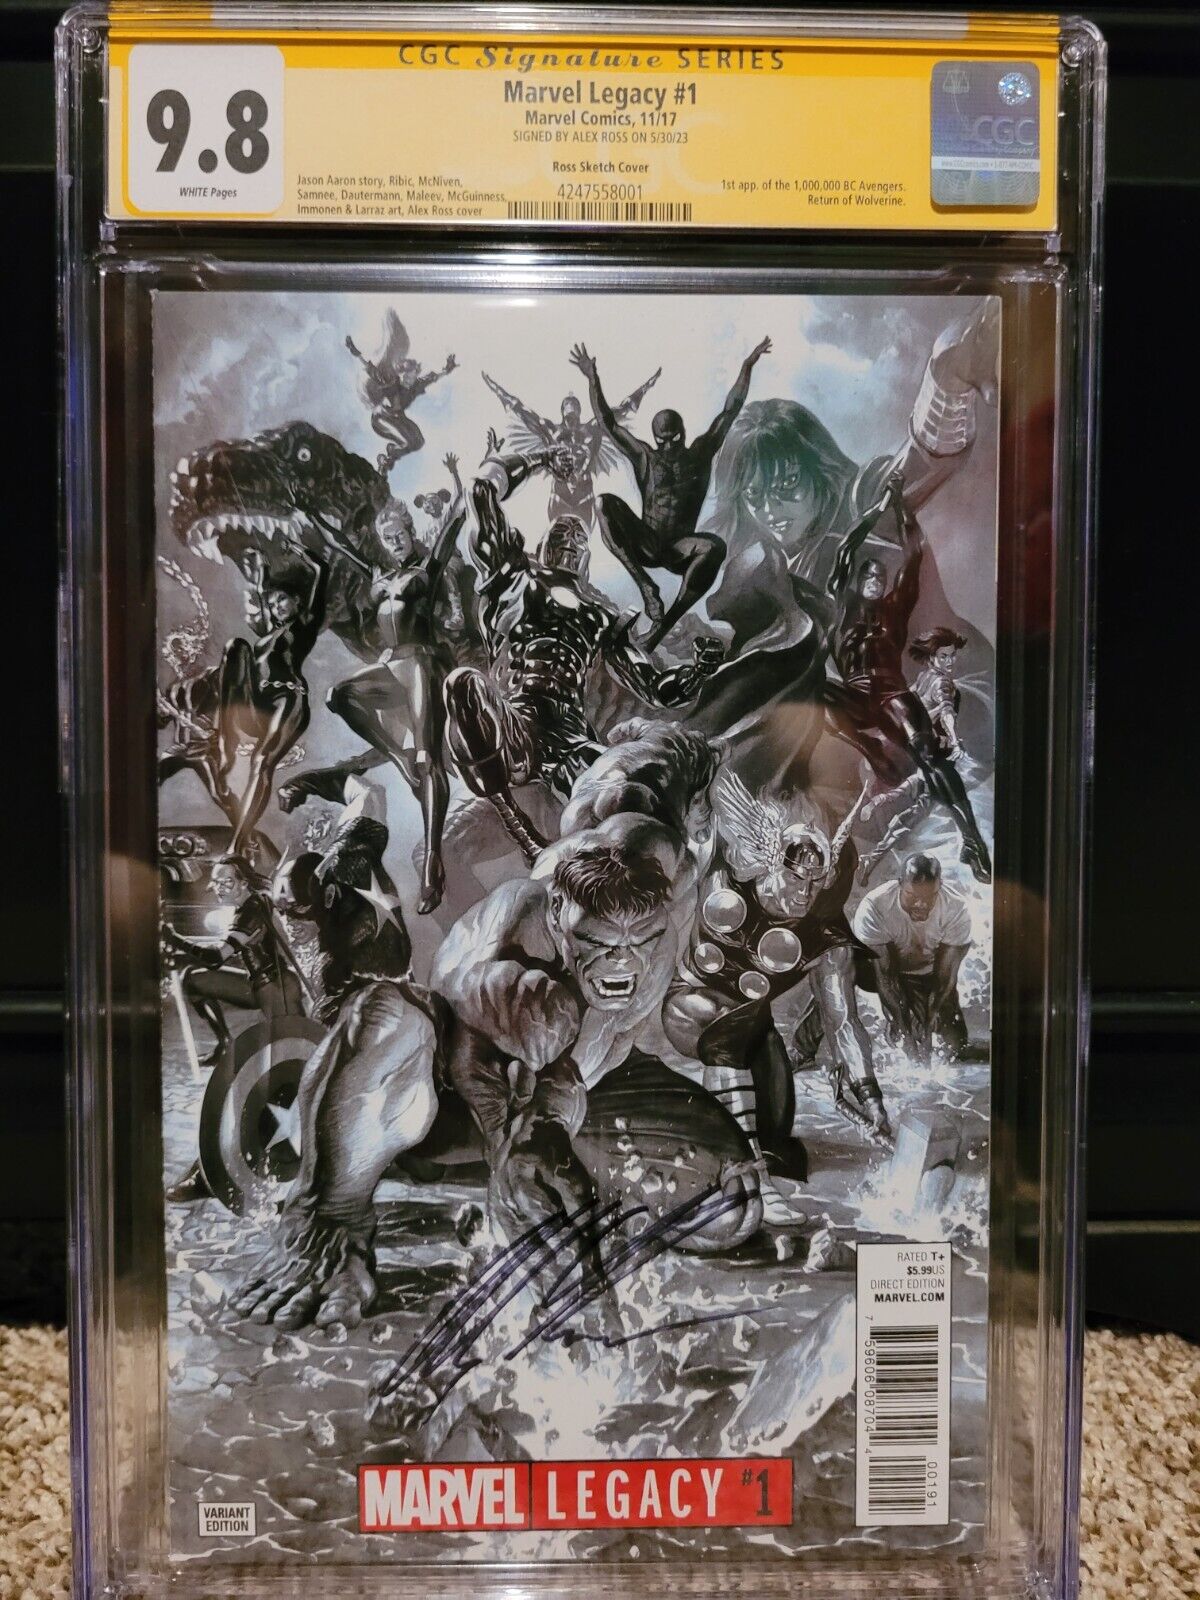 Marvel Legacy 1 CGC 9.8 SS SIGNED ALEX ROSS Sketch Variant (1000000 BC Avengers)